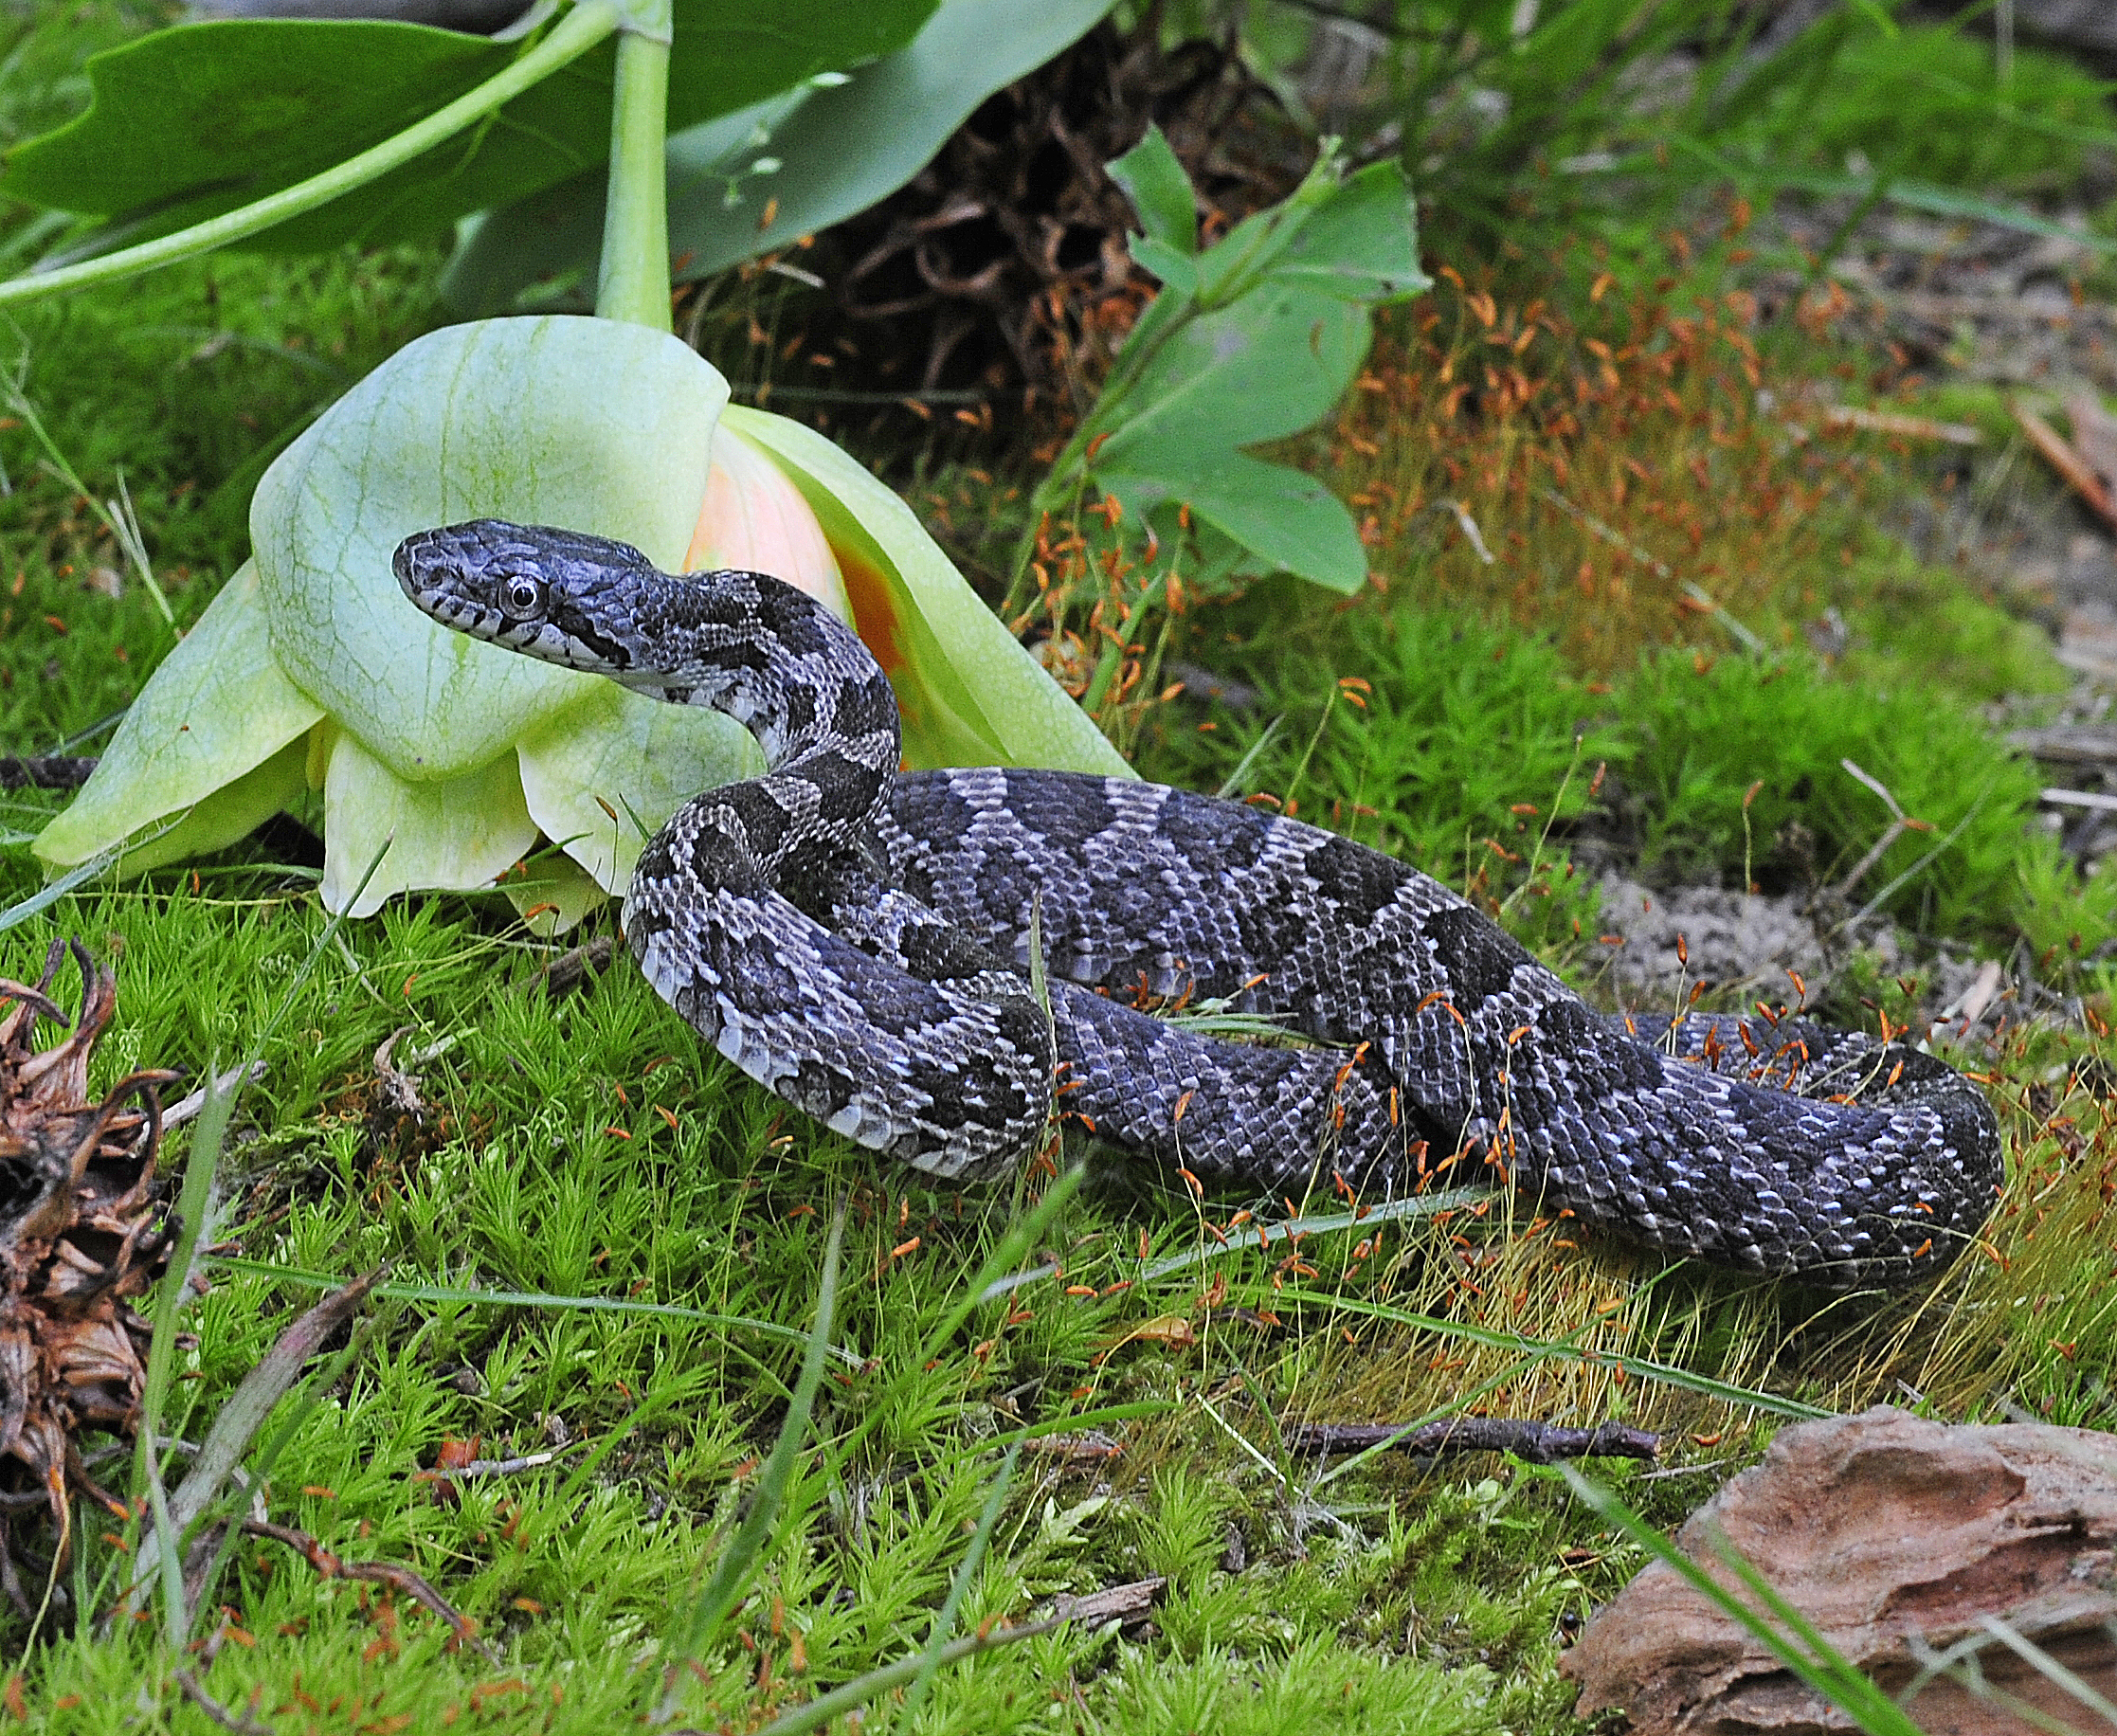 A juvenile eastern ratsnake with a gray diamond pattern along its back. The small snake is curled up on bright green moss.